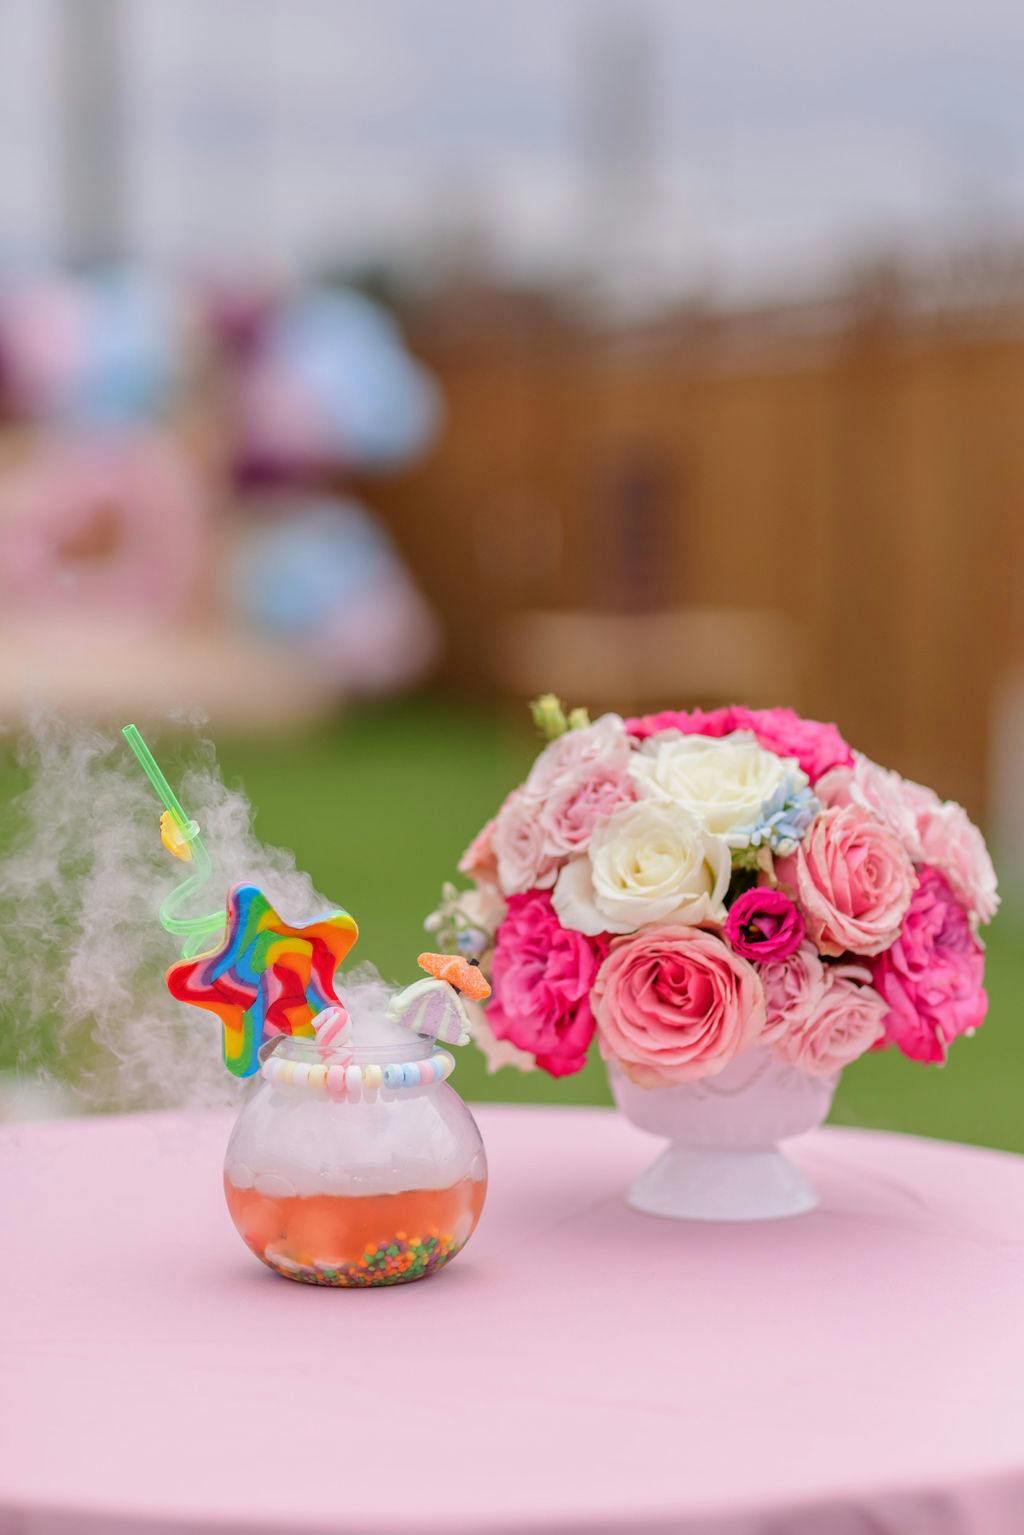 Minnie Mouse Themed Birthday Party at Bridge 410 in Chicago, Illinois | PartySlate